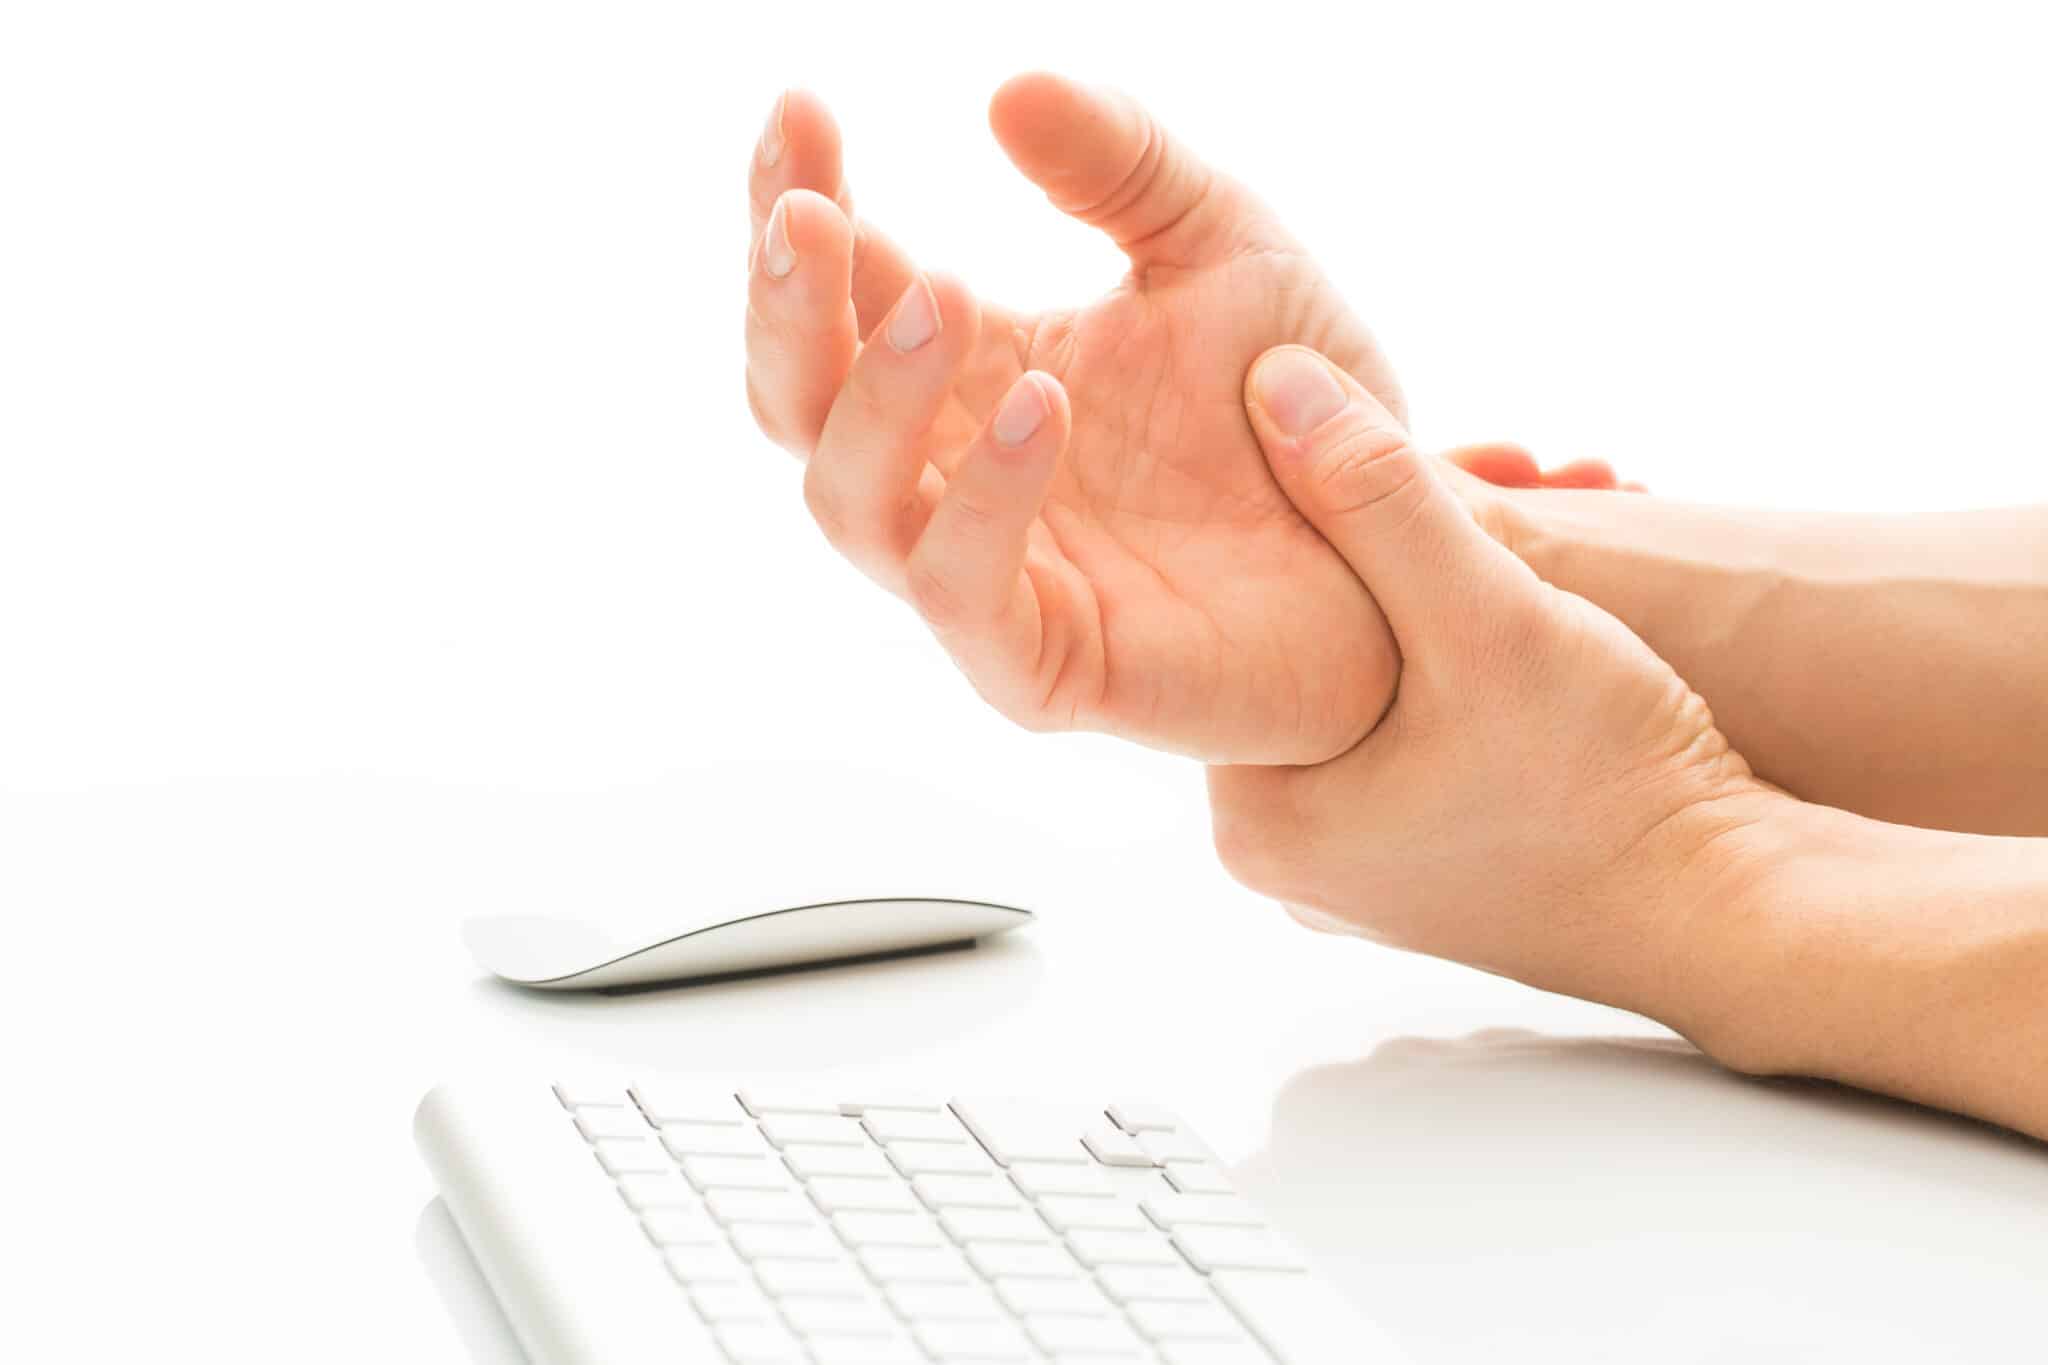 man holding wrist after typing